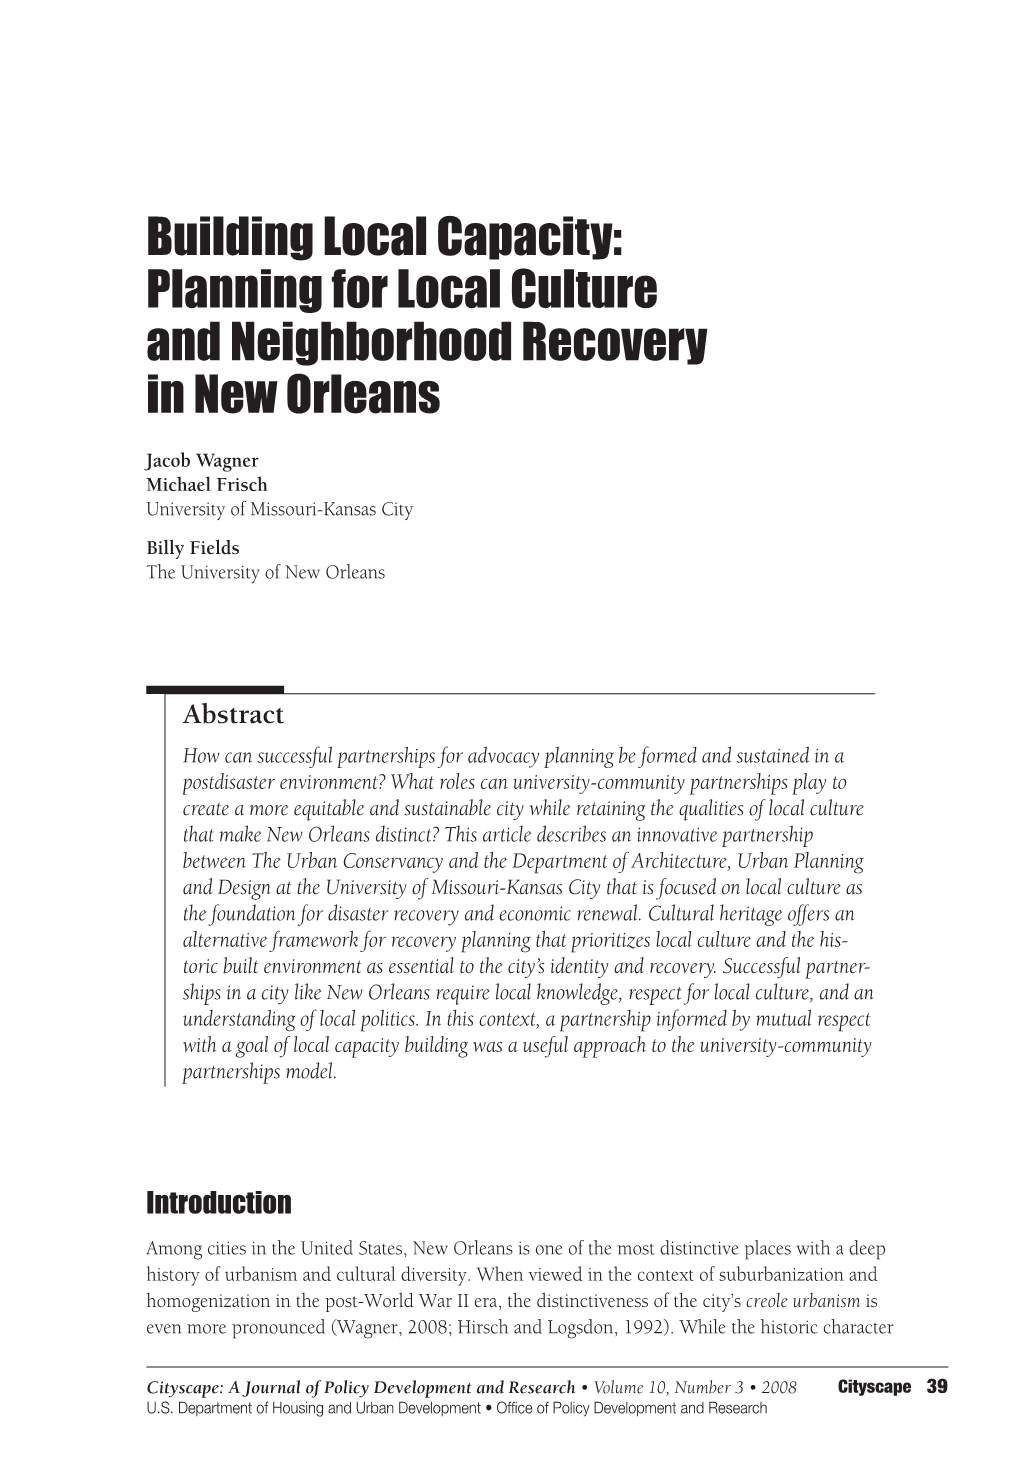 Planning for Local Culture and Neighborhood Recovery in New Orleans